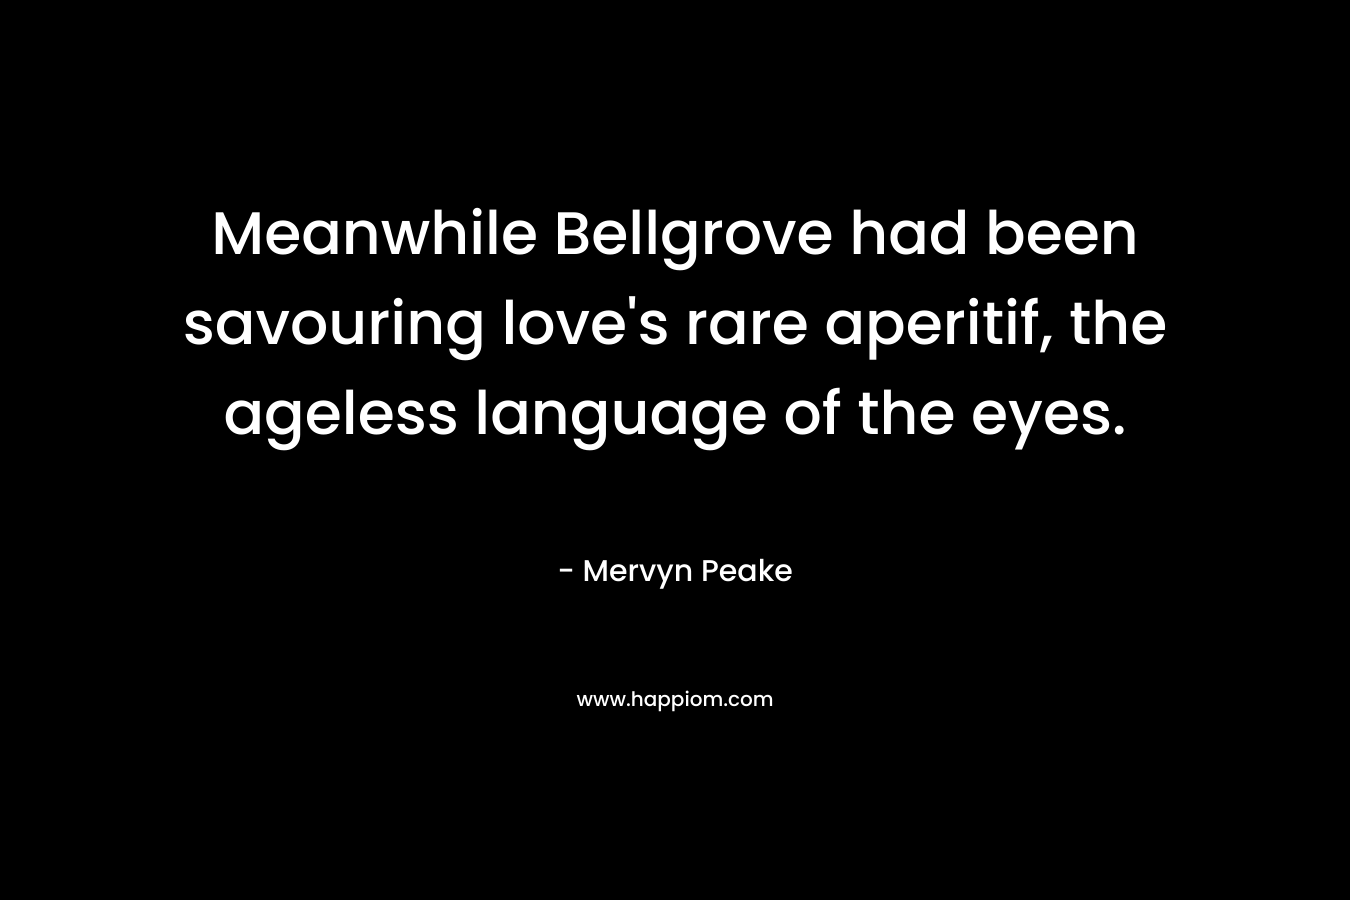 Meanwhile Bellgrove had been savouring love's rare aperitif, the ageless language of the eyes.